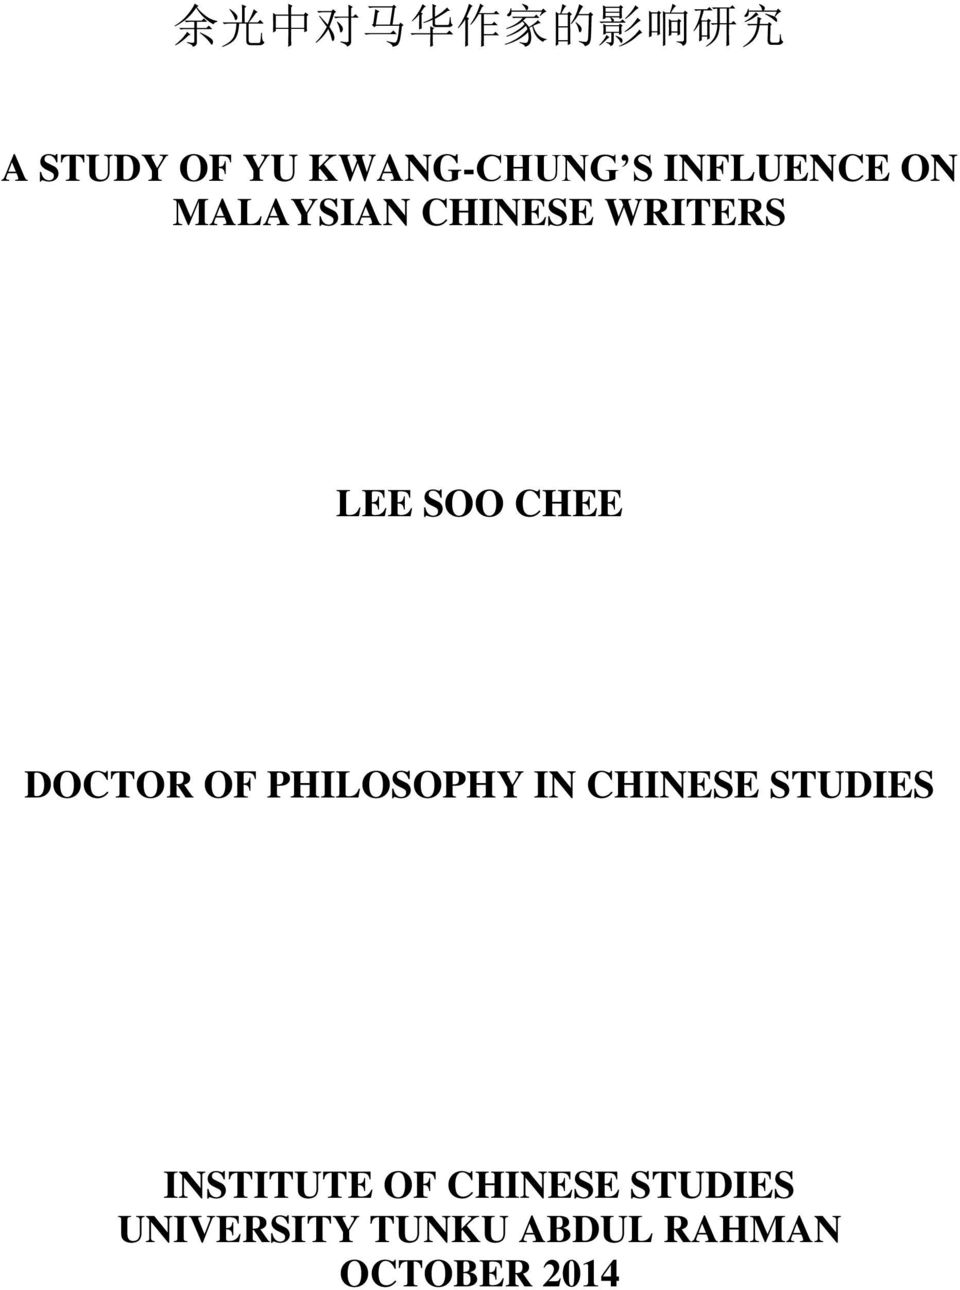 DOCTOR OF PHILOSOPHY IN CHINESE STUDIES INSTITUTE OF